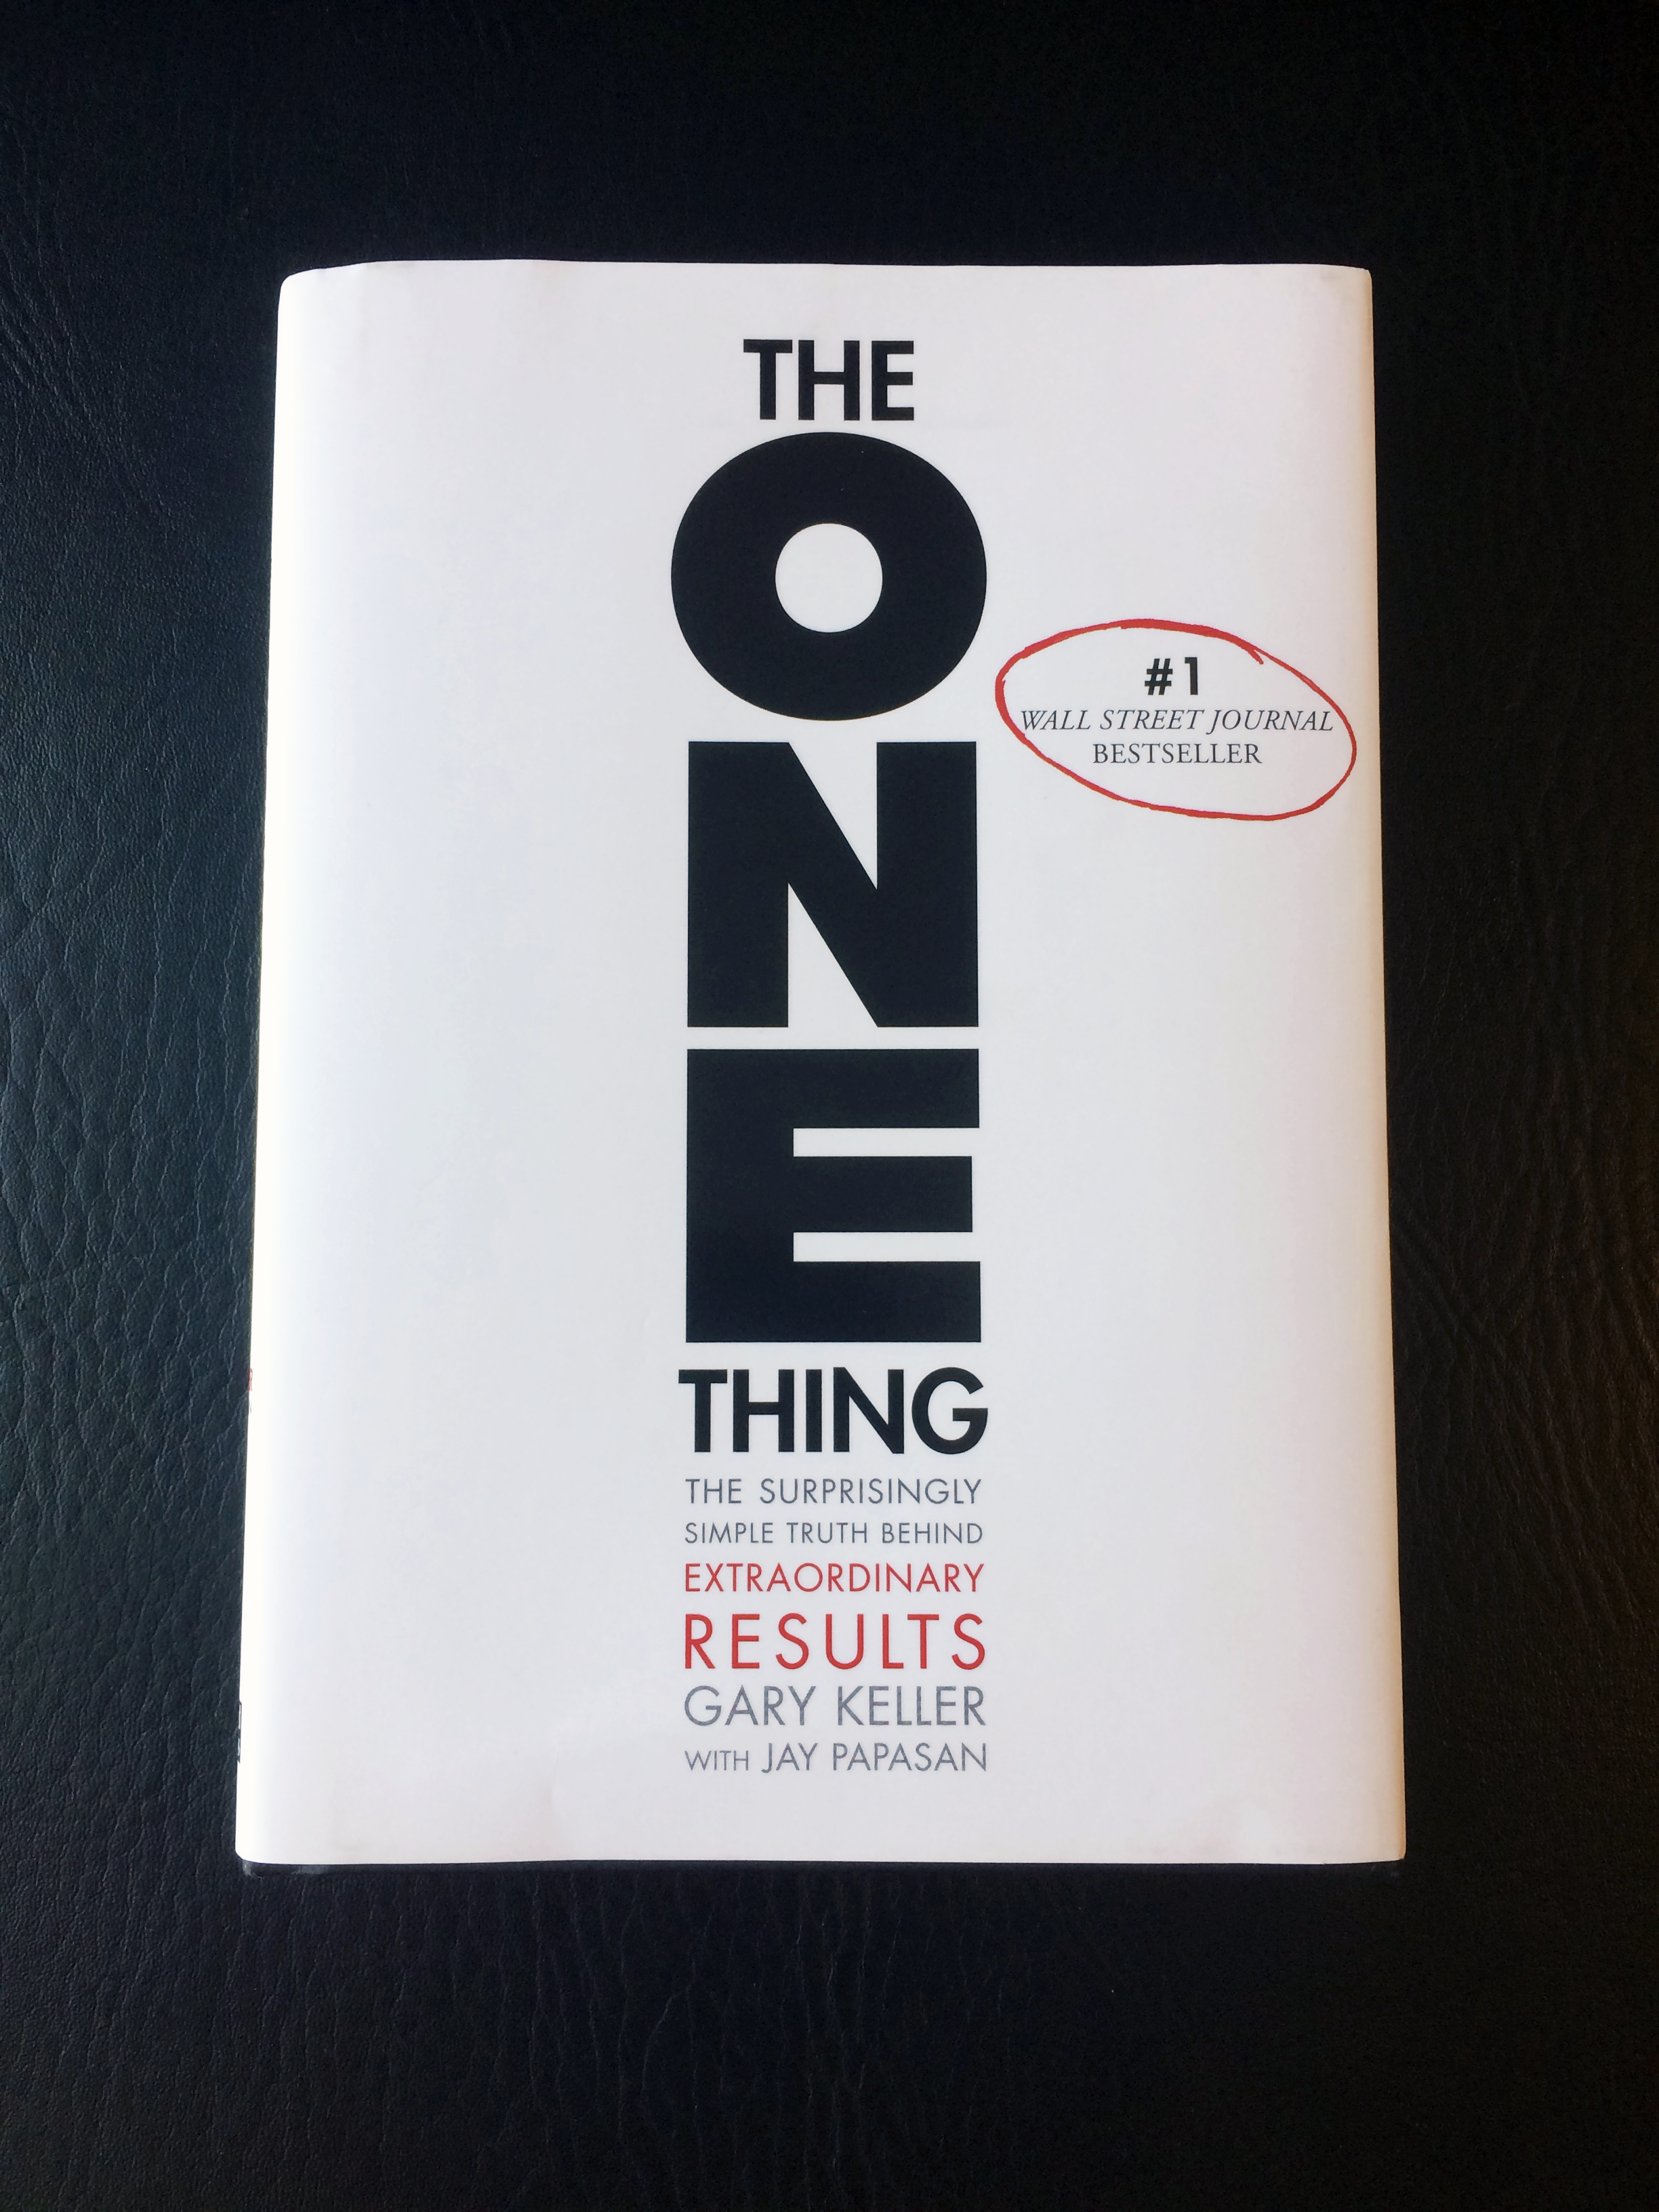 the one thing by marci lyn curtis